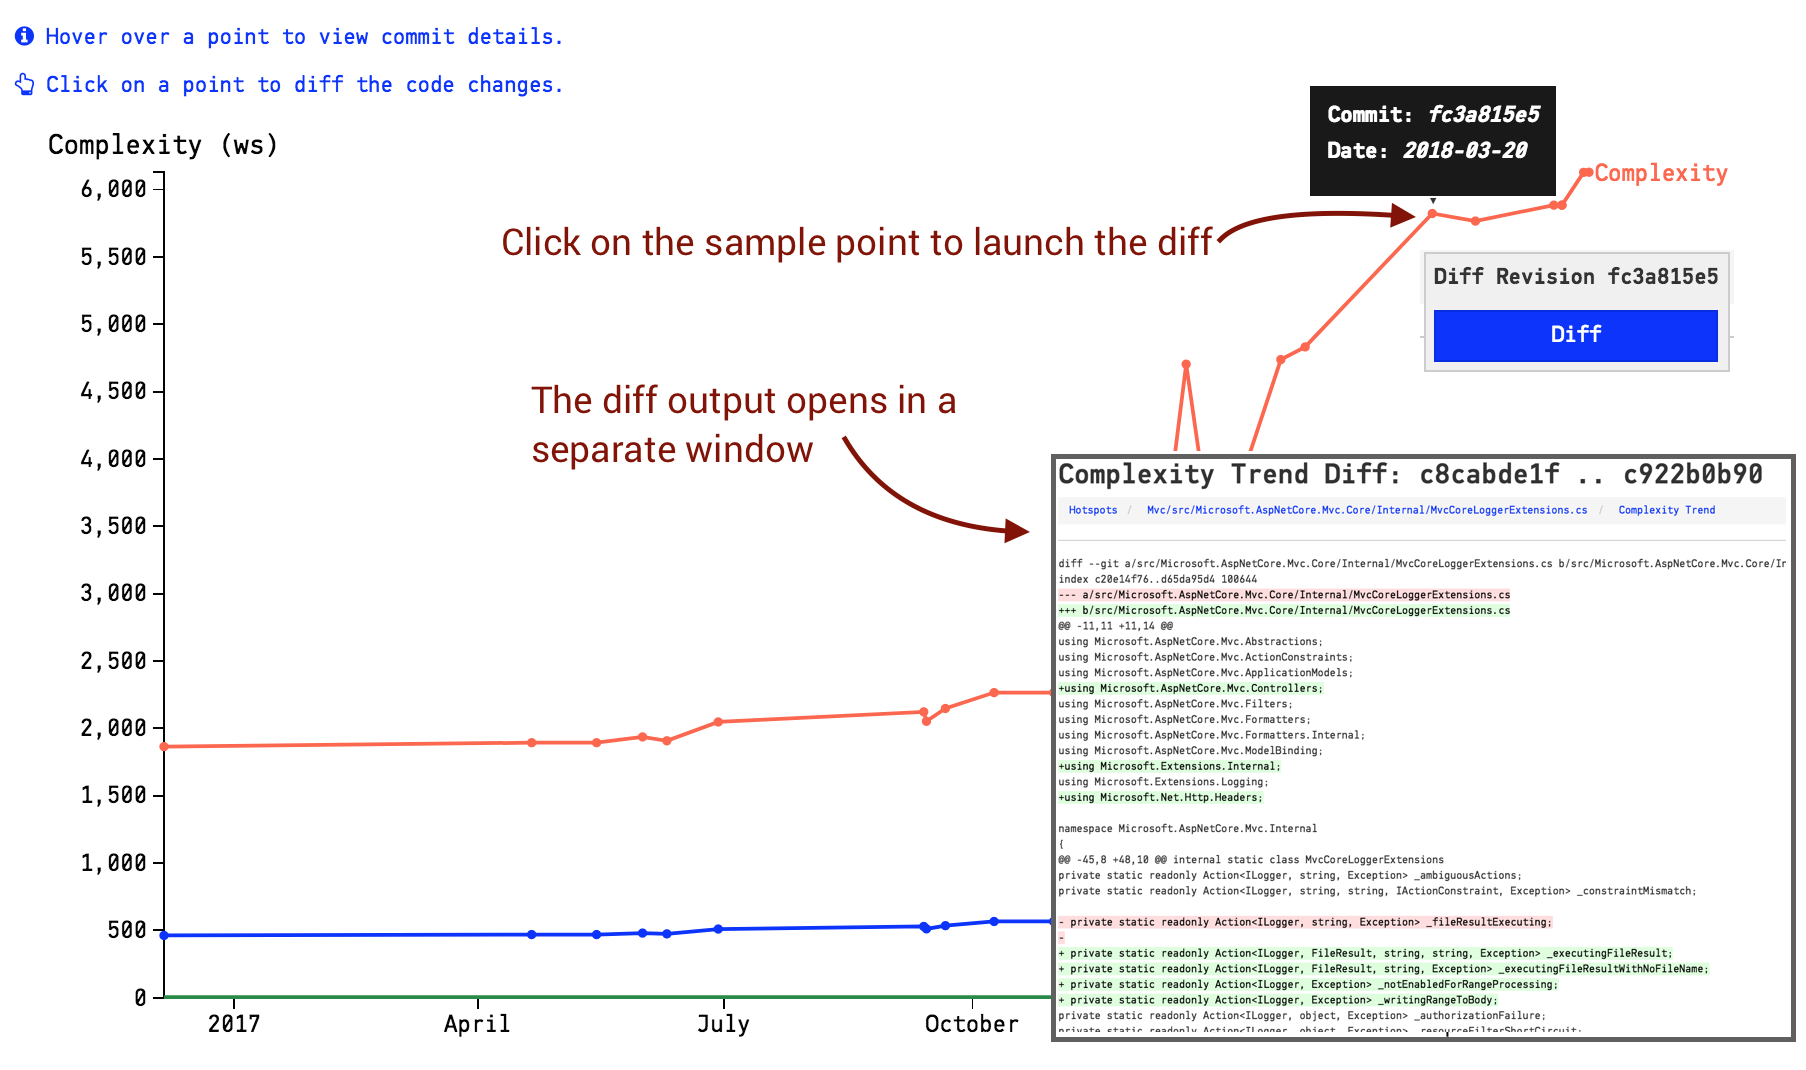 Diff a complexity trend by clicking on a sample point.